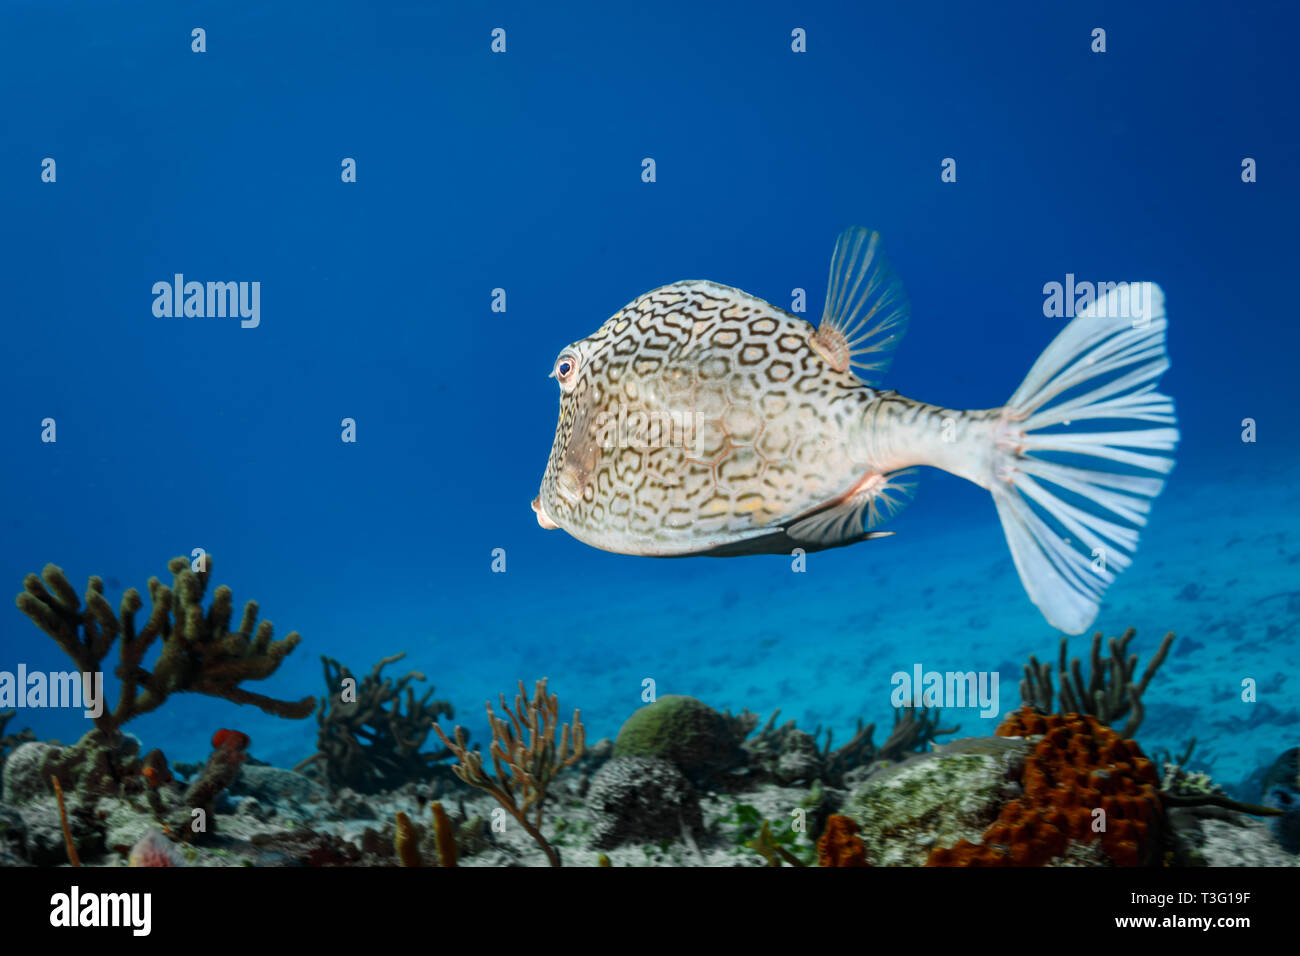 Closeup of scale pattern  honeycomb cow fish or trunk fish, Acanthostracion polygonius Stock Photo